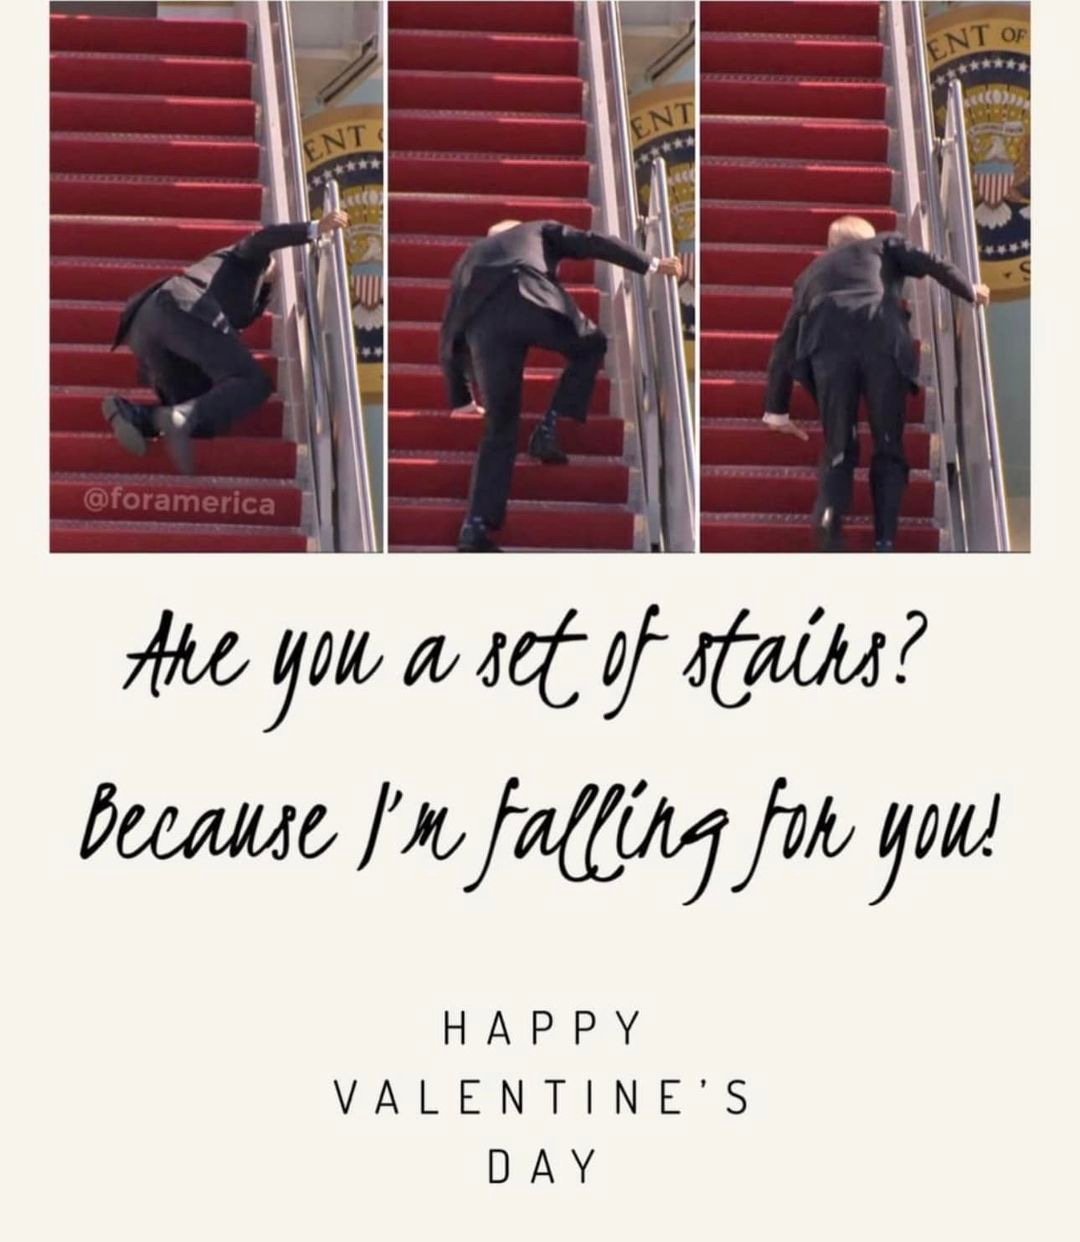 May be an image of 3 people and text that says 'ENT NT @foramerica Ane you set of stairs? Because I'n falling for you! HAPPY VALENTINE'S DAY'